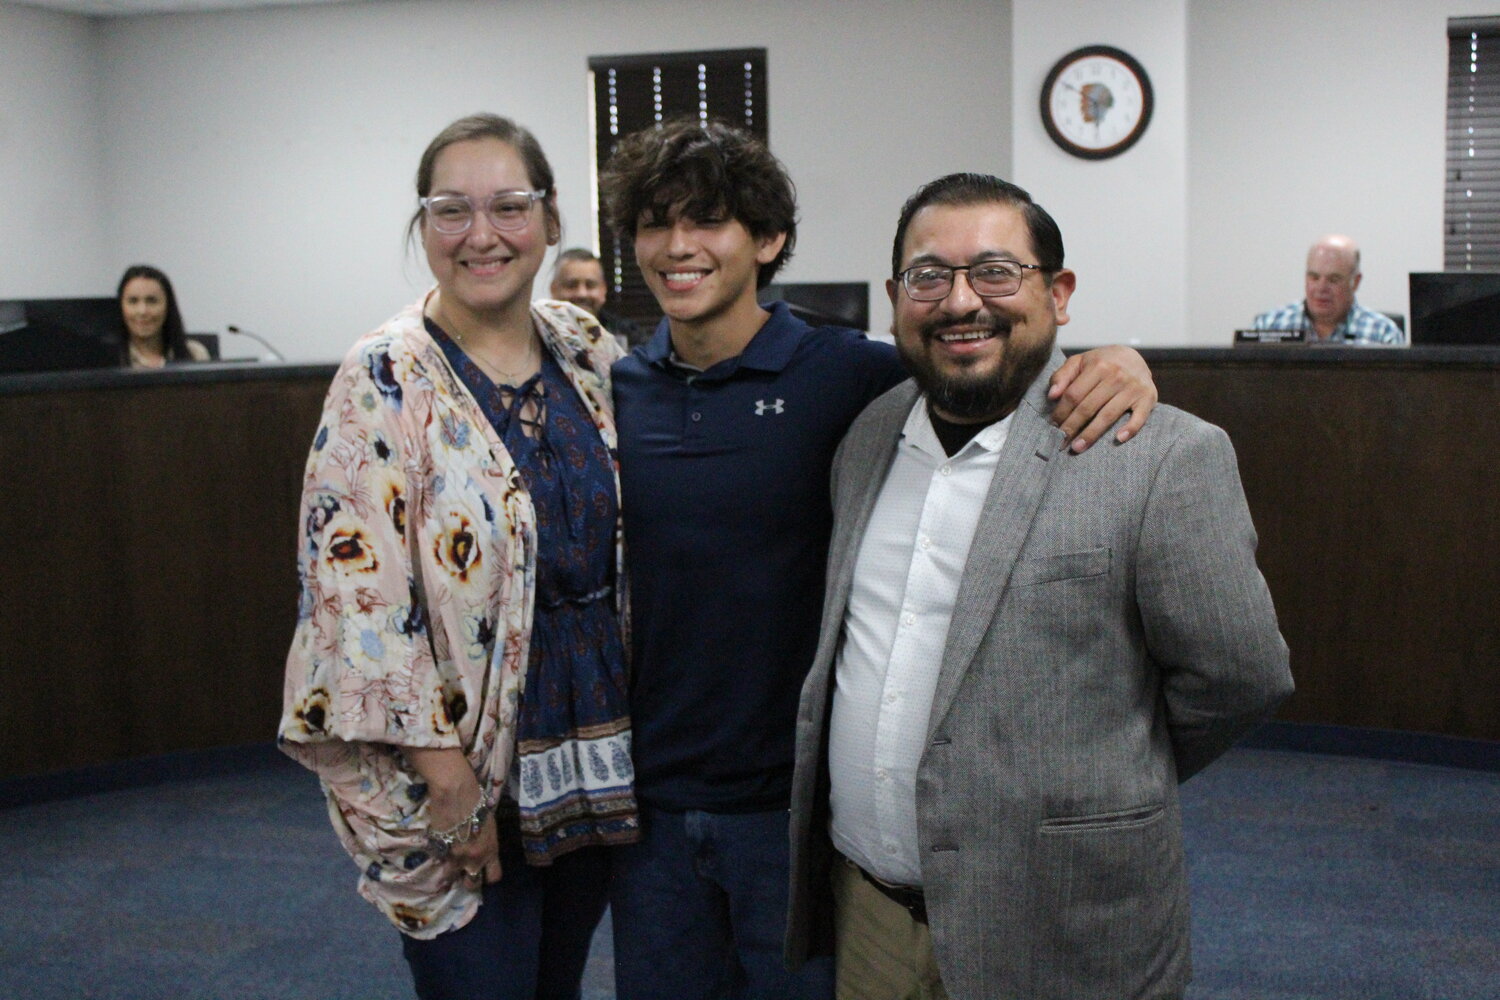 Richard Varela (right) with his family at the Monday, June 24 Gonzales ISD school board meeting. Varela was named the new Gonzales High School band director; he was previously the band director of Cuero High School.